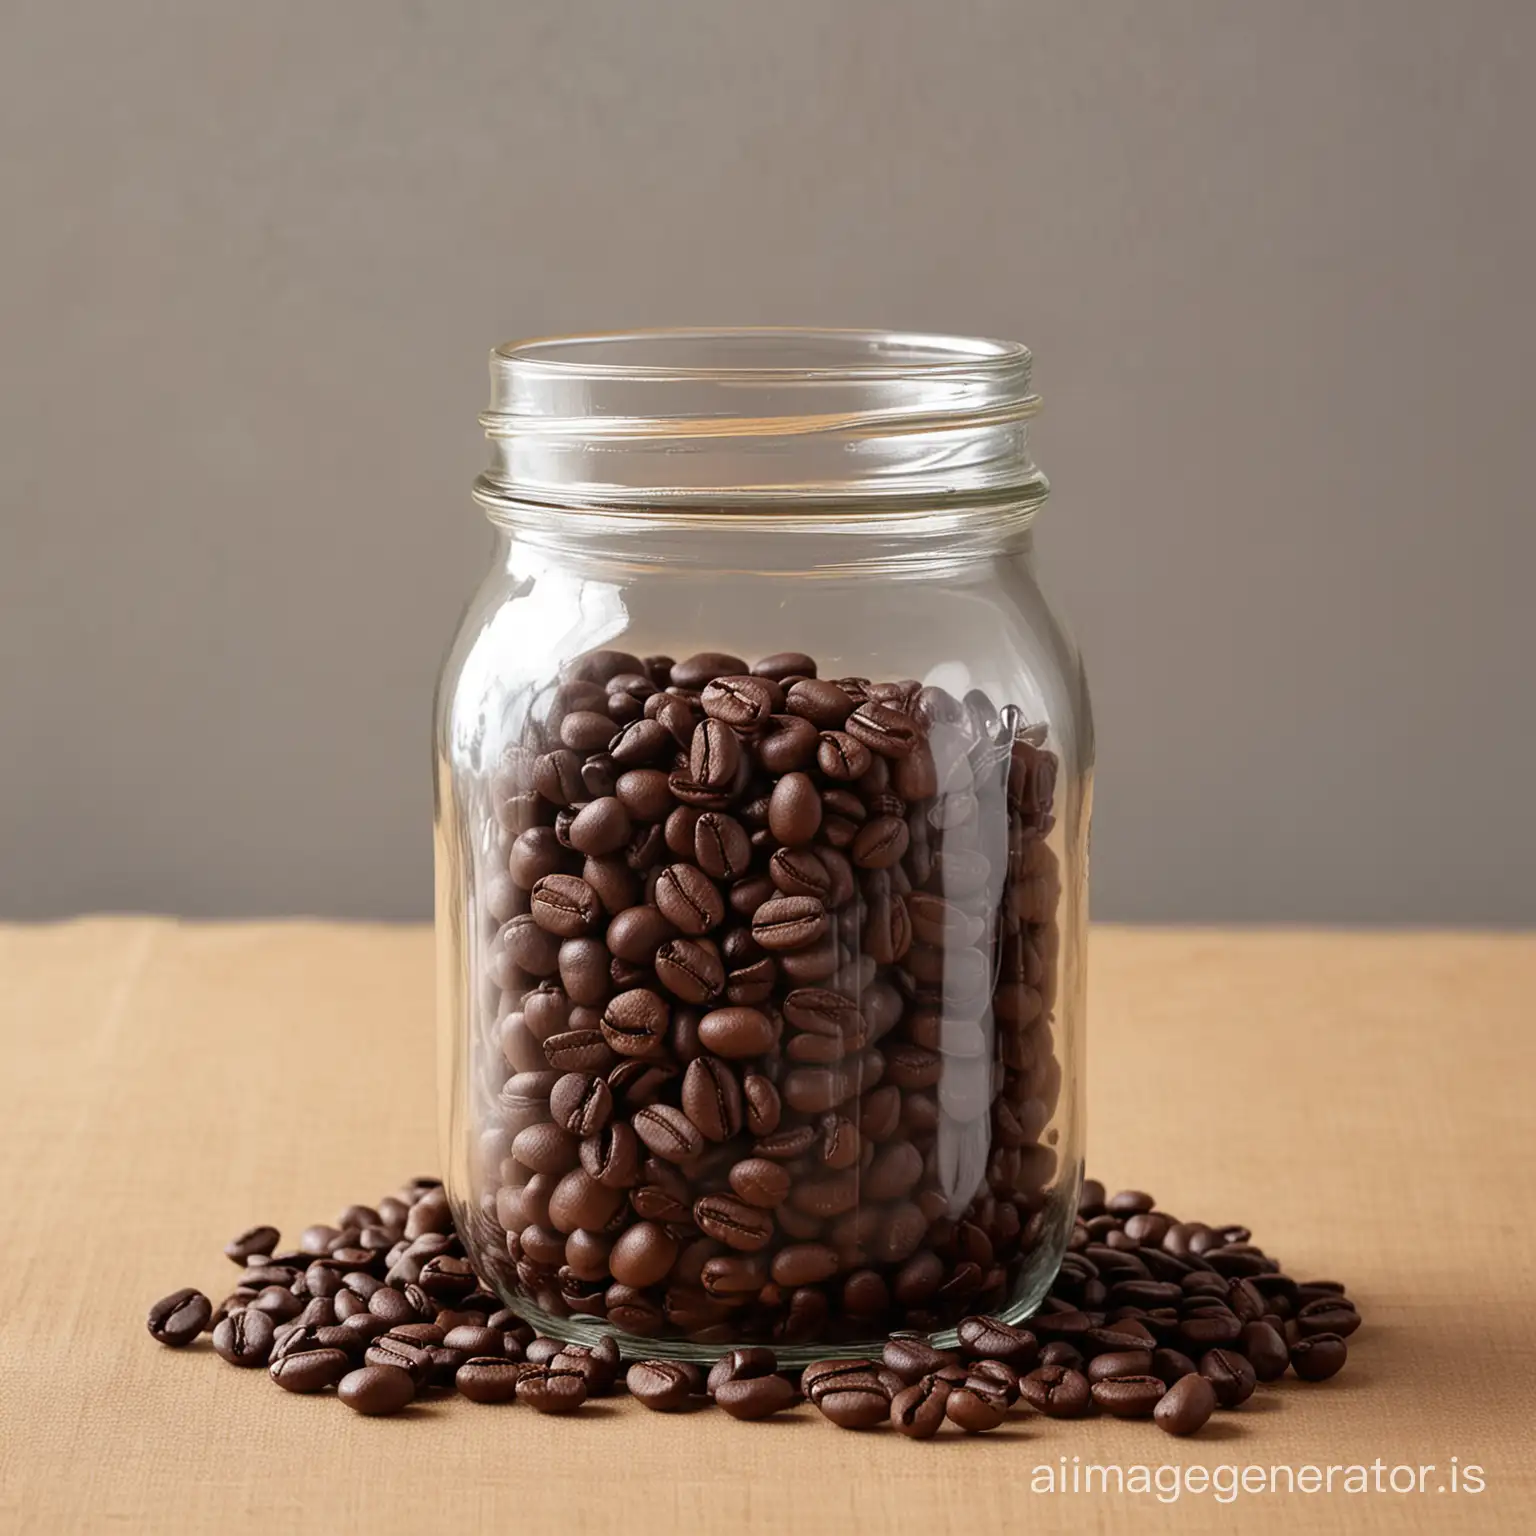 Rustic-Wedding-Table-Centerpiece-Mason-Jar-Vase-with-Whole-Coffee-Beans